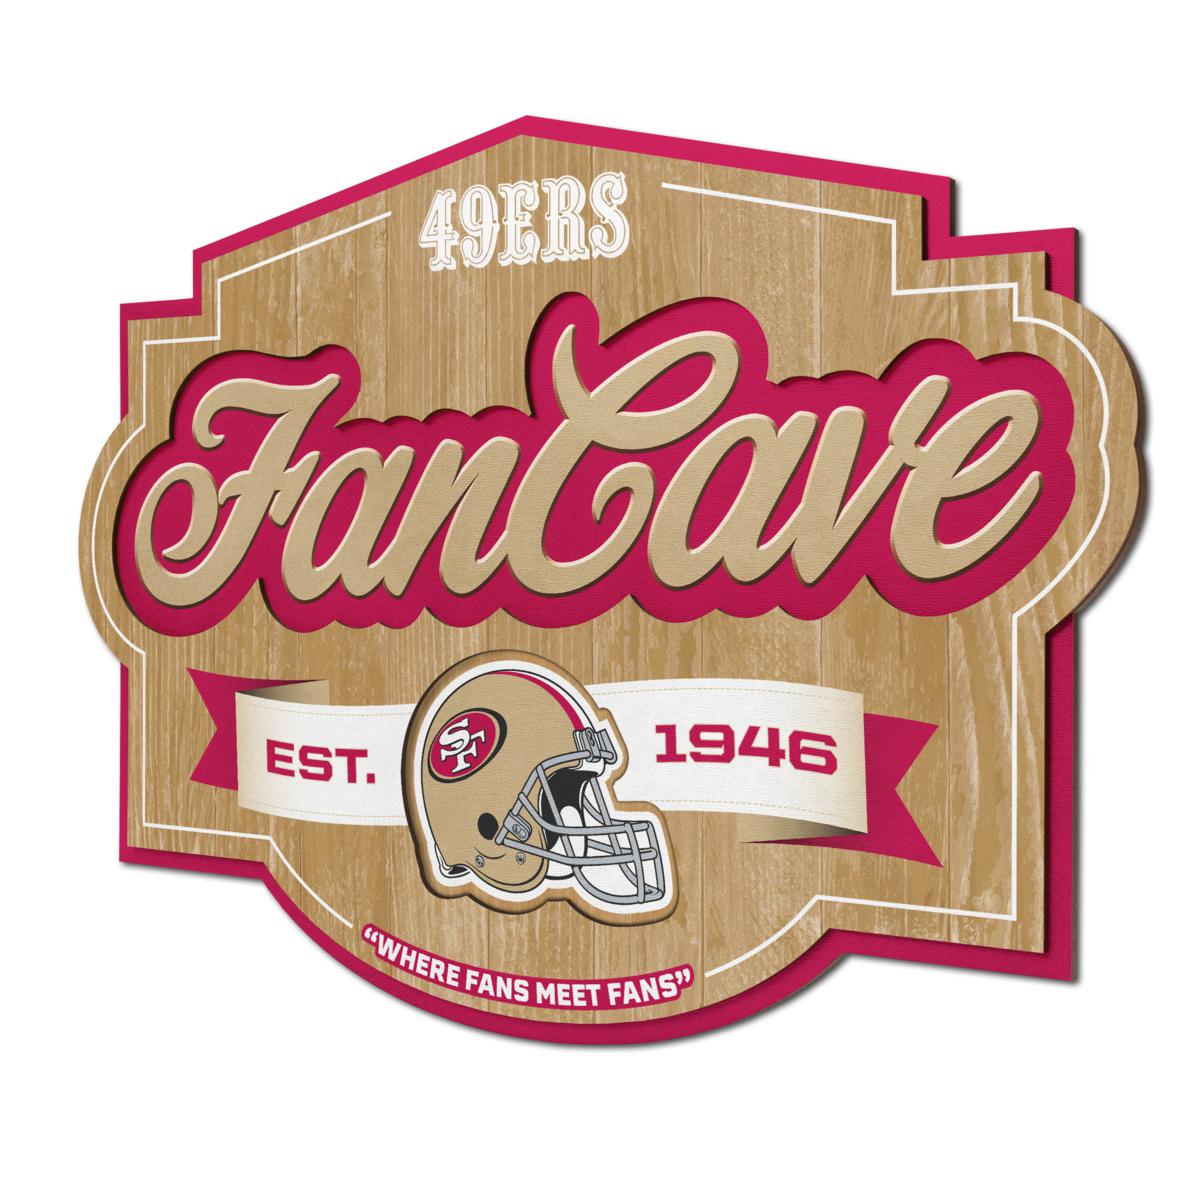 Letrero Madera Fan Cave 3D Sign 49Ers